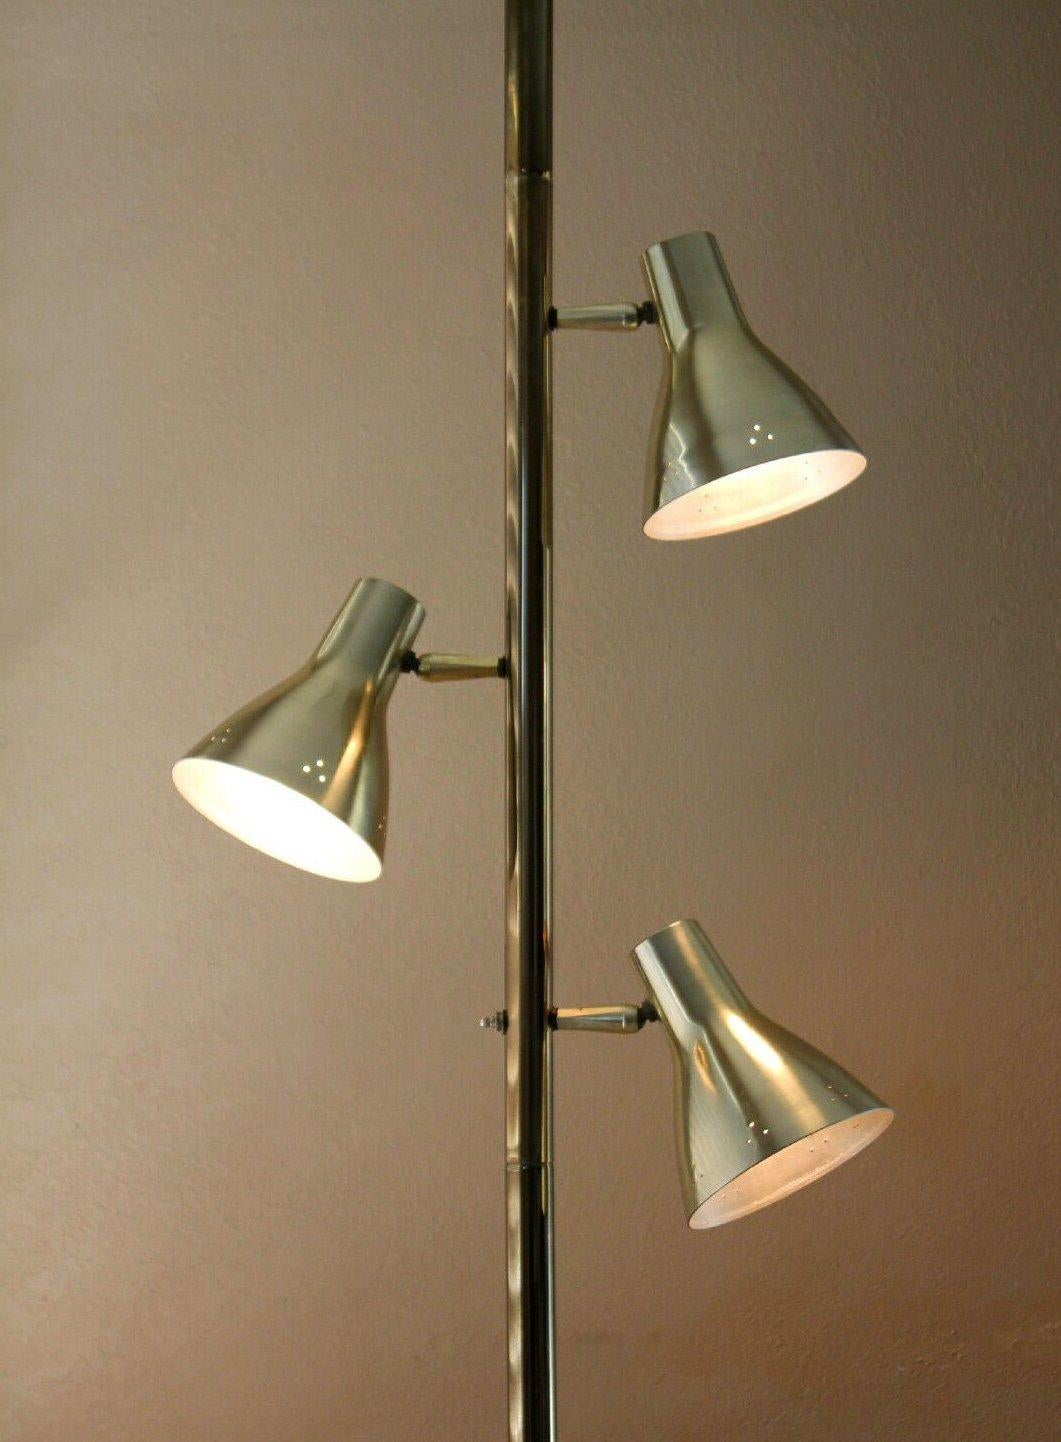 1960s tension pole lamp